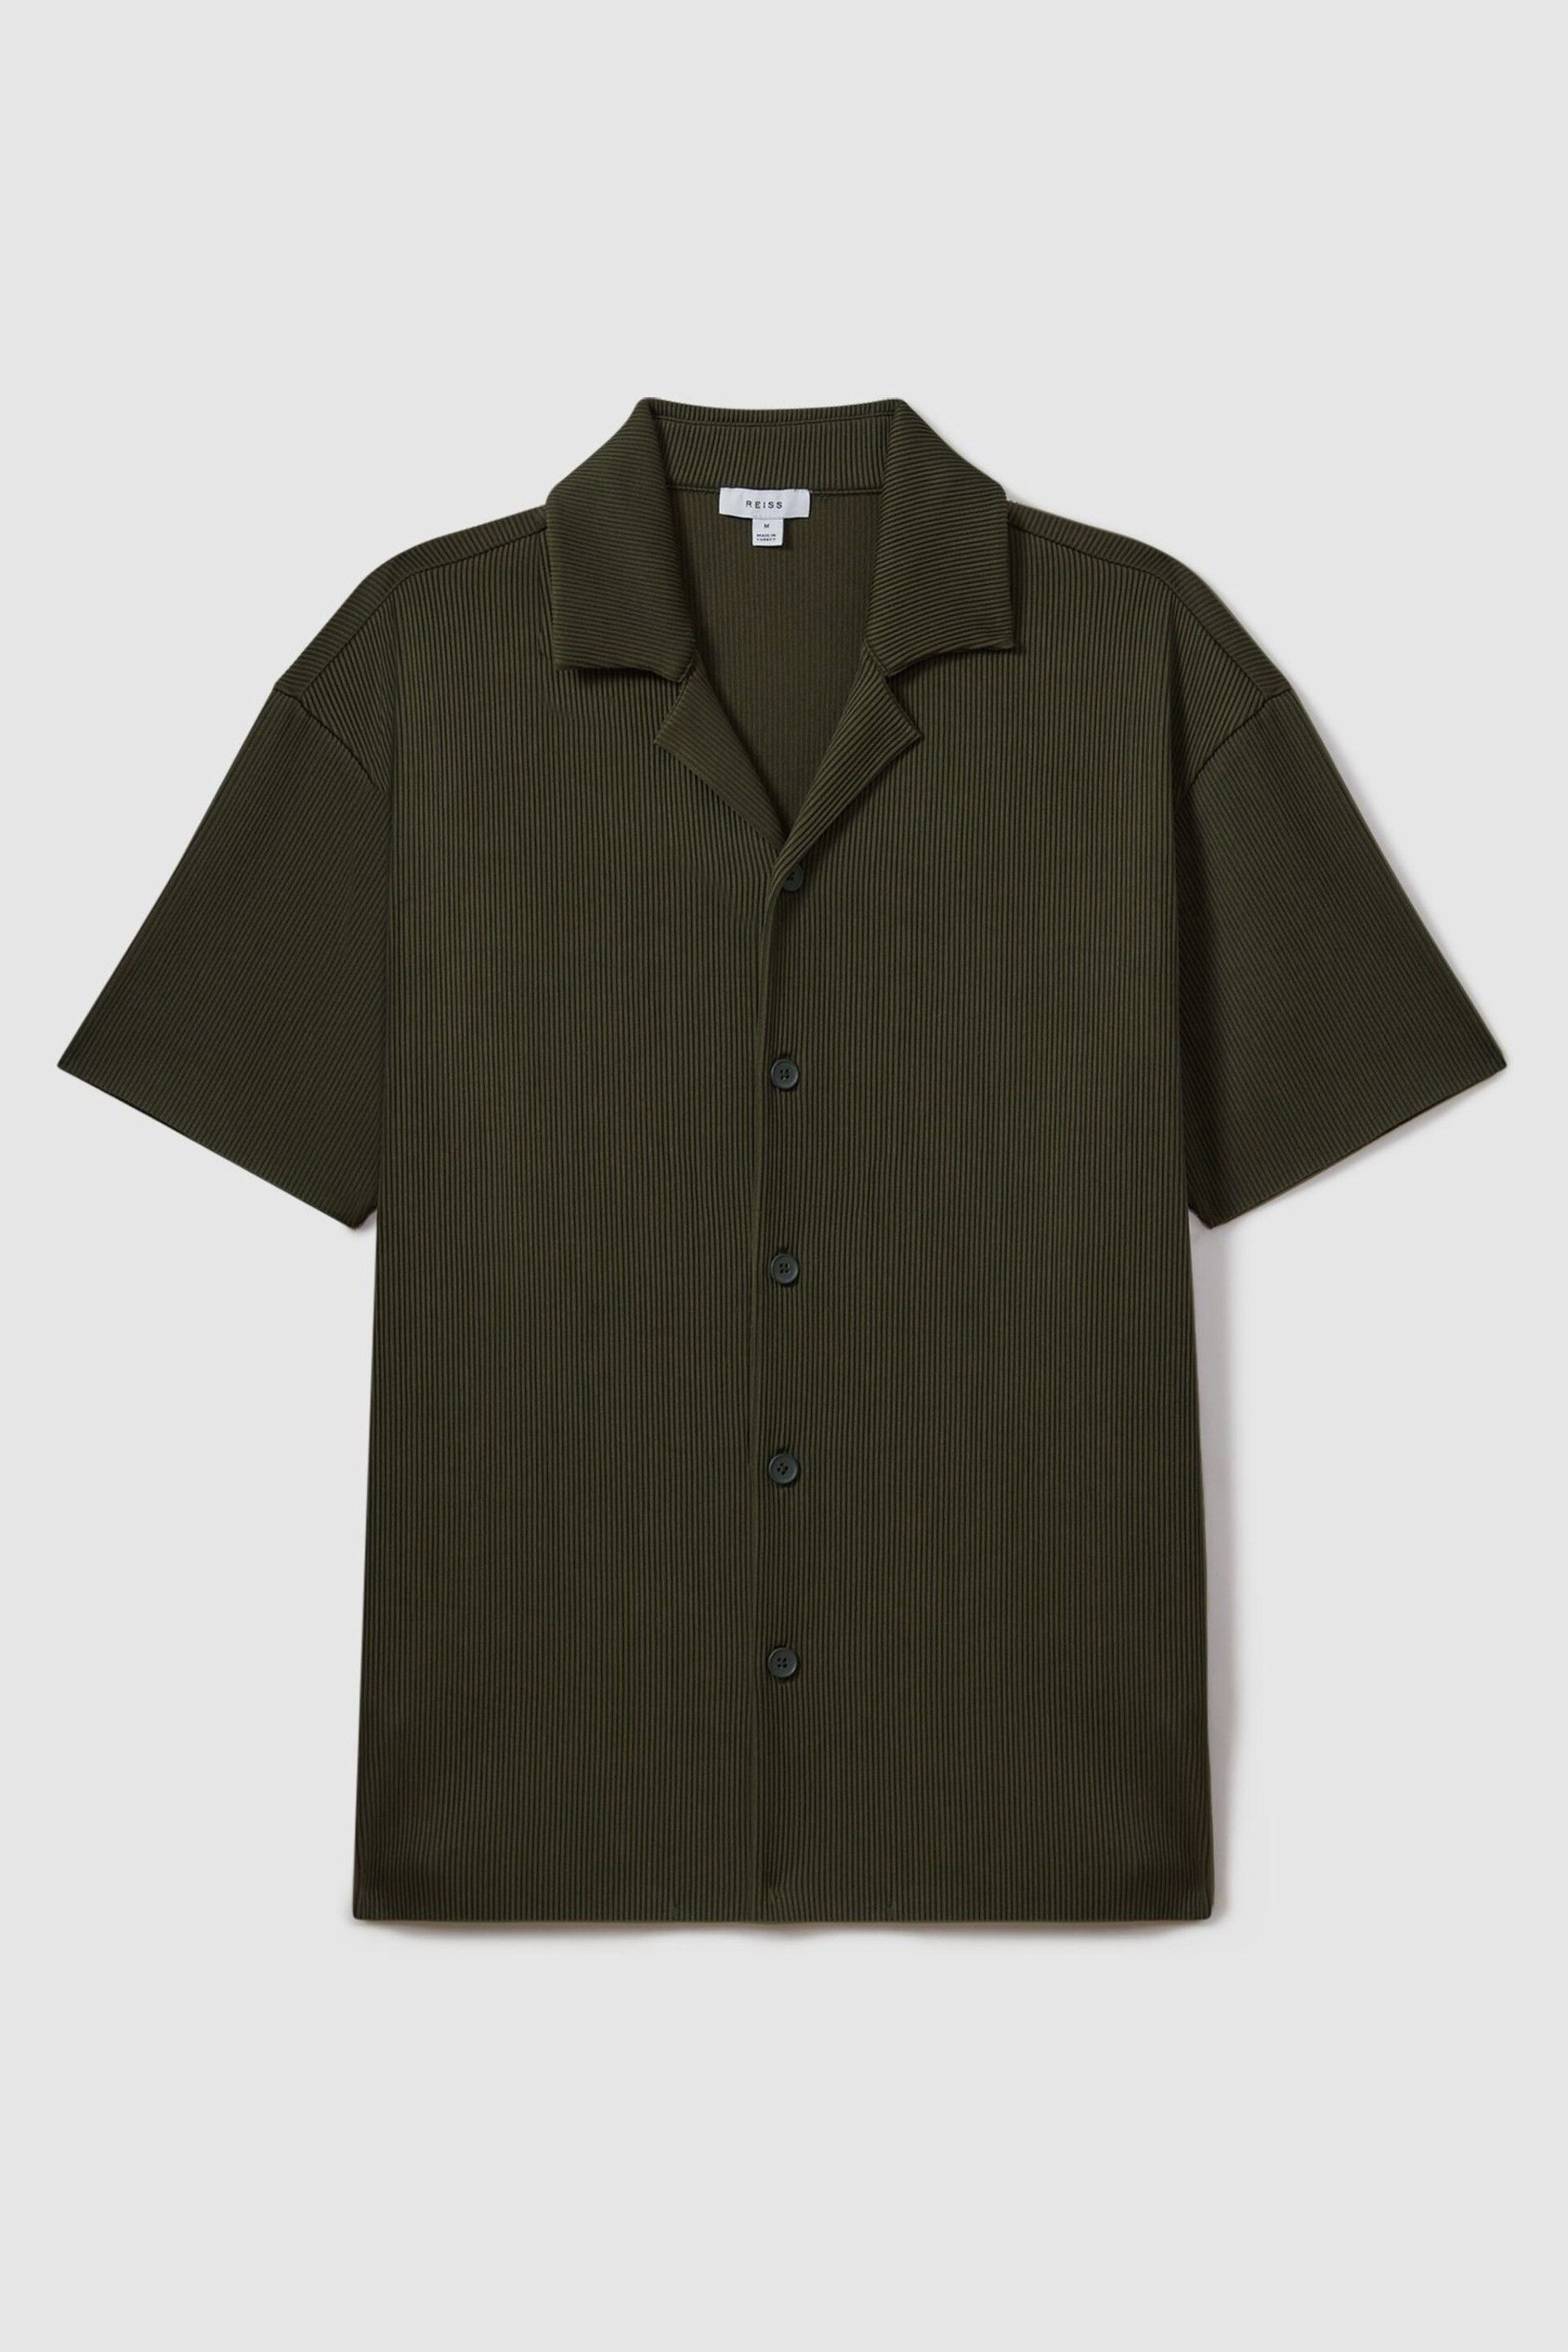 Reiss Green Chase Ribbed Cuban Collar Shirt - Image 2 of 5